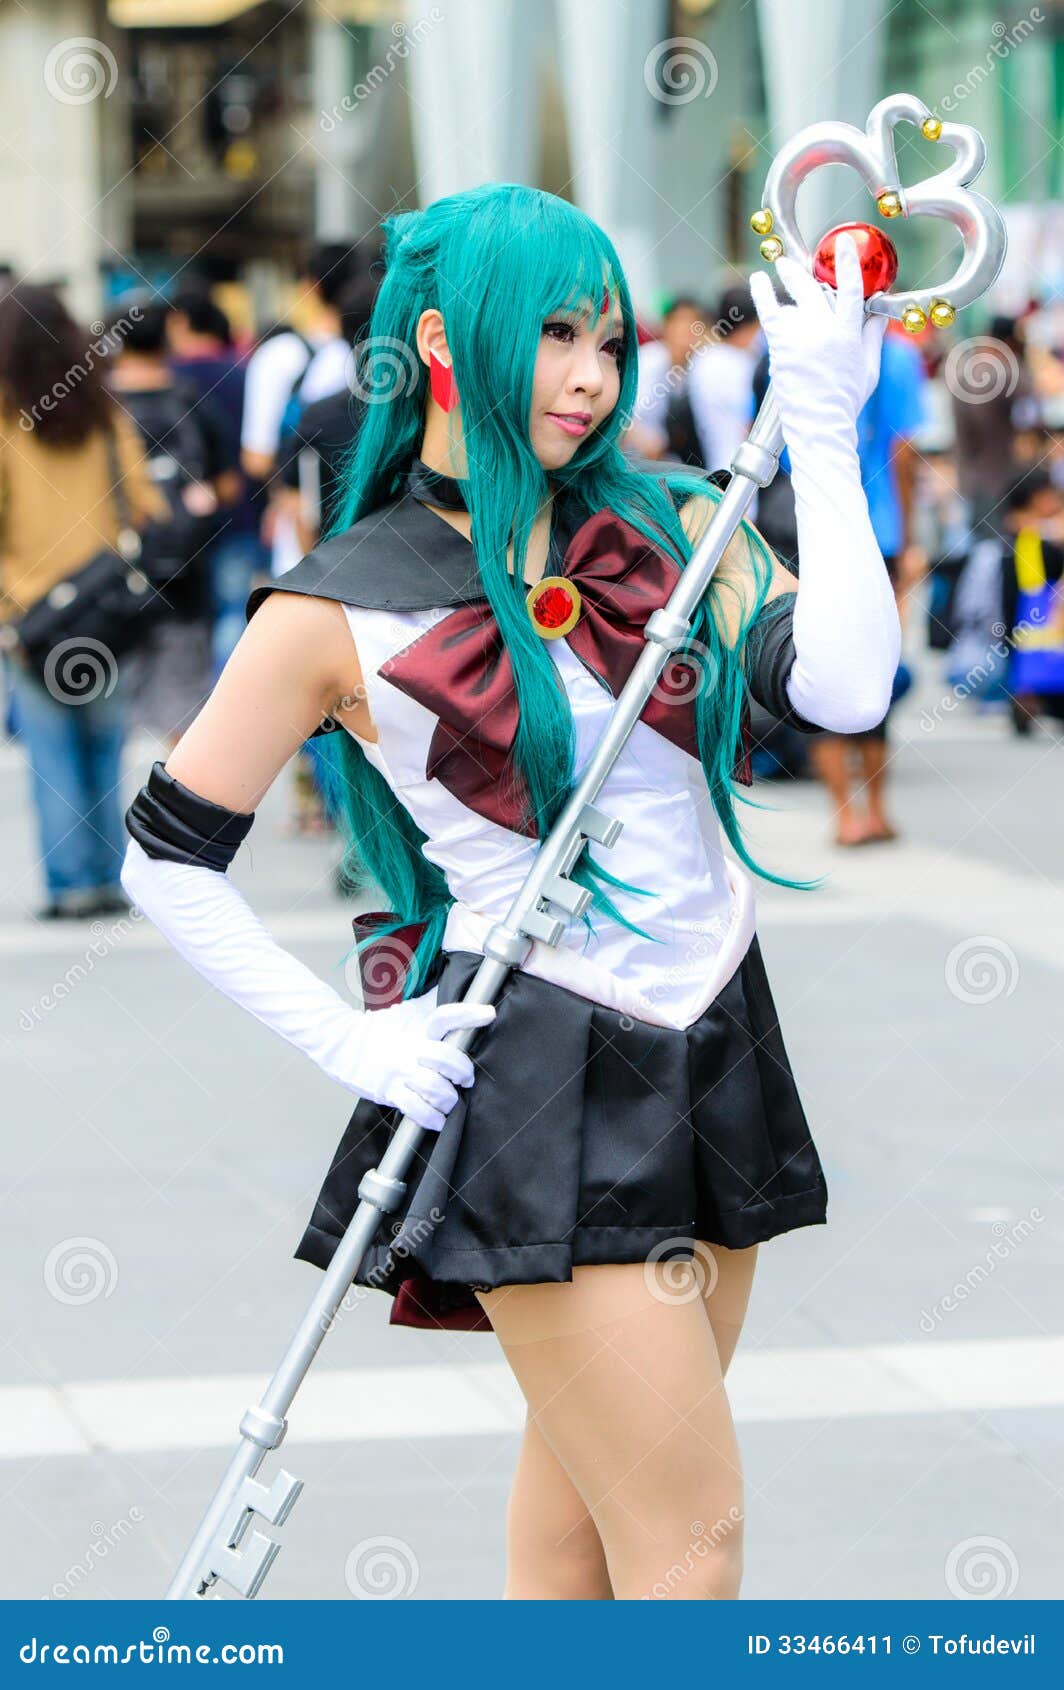 http://thumbs.dreamstime.com/z/cosplayer-as-characters-sailor-moon-japan-festa-bangkok-august-august-central-world-thailand-33466411.jpg